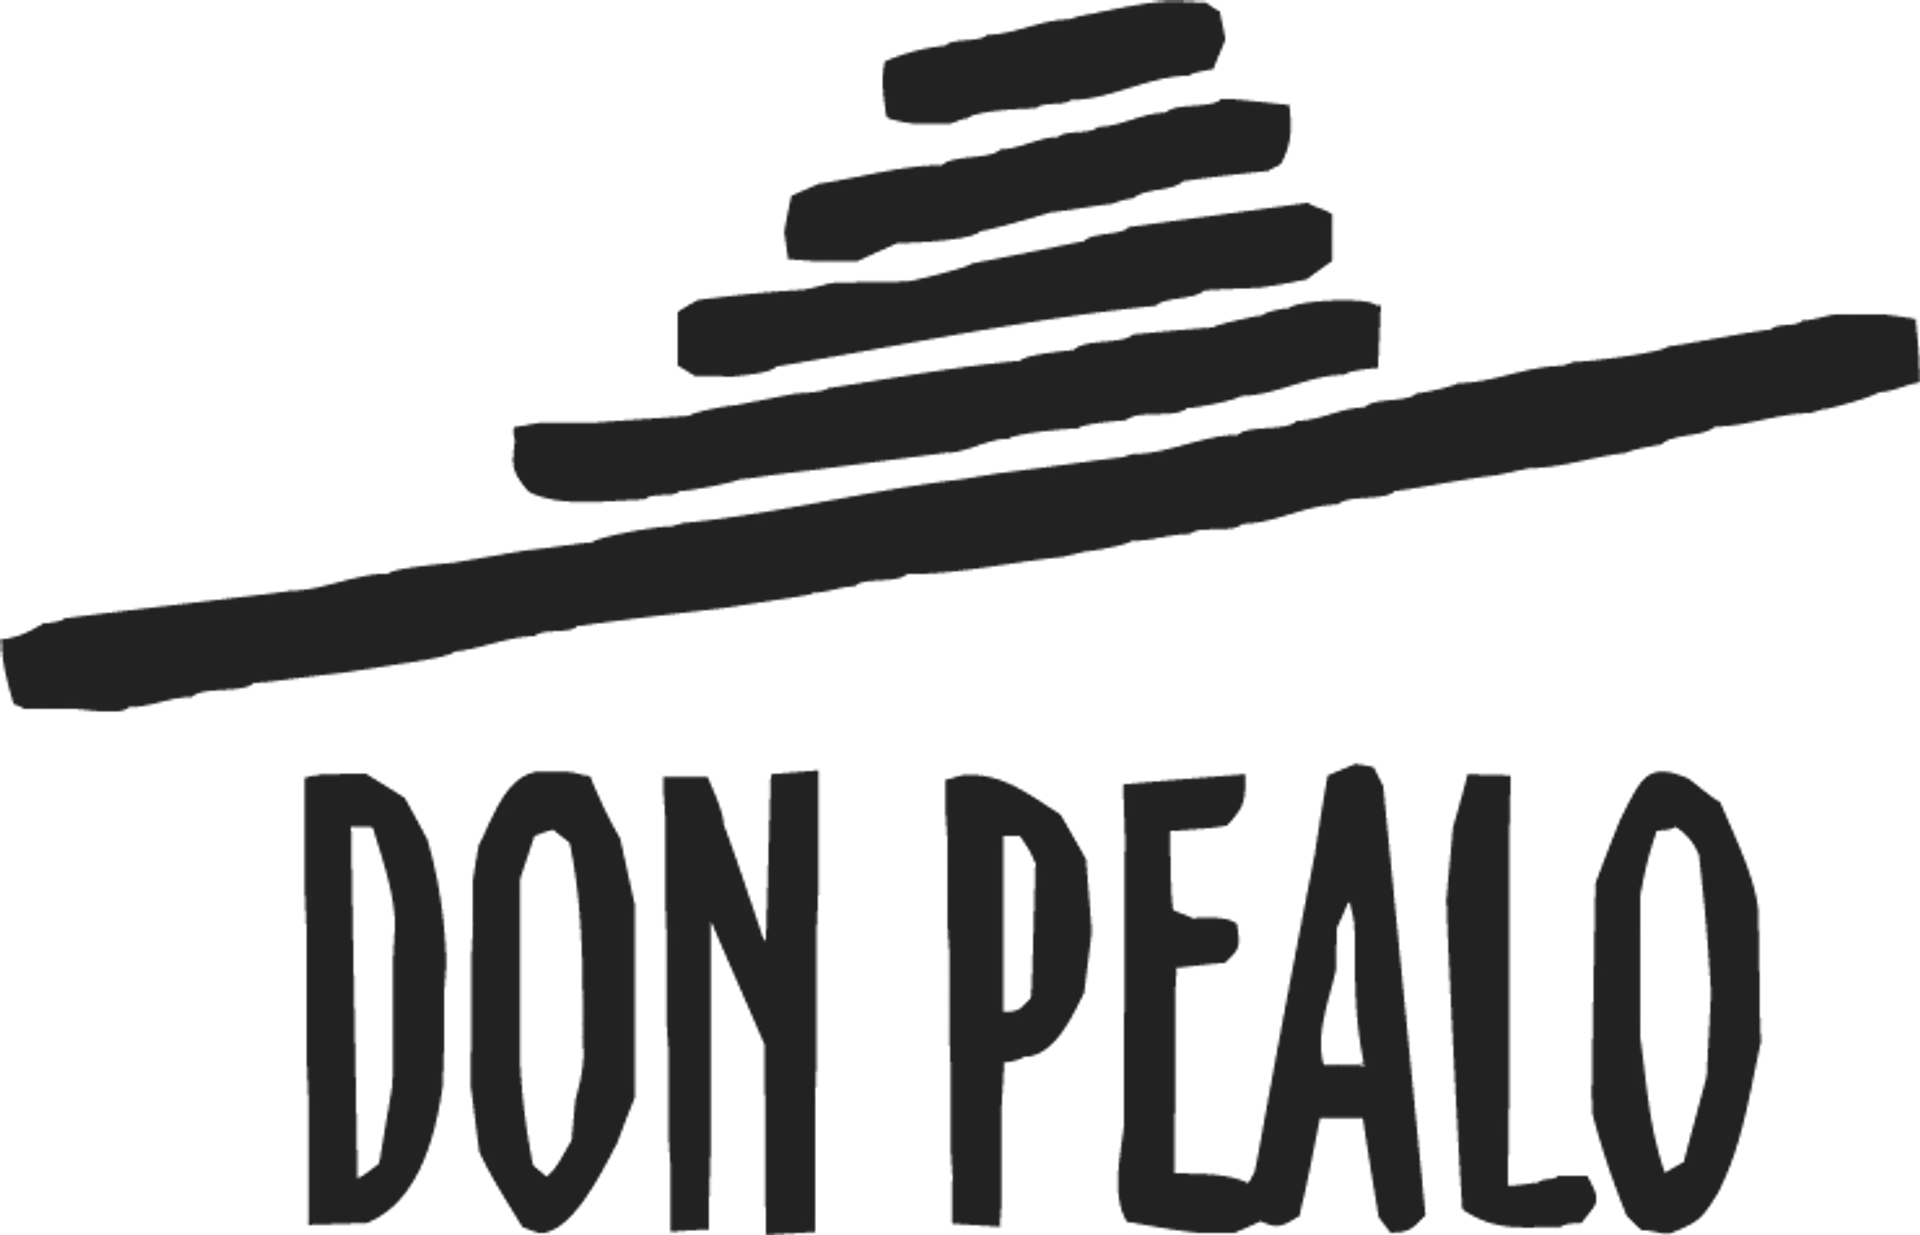 DON PEALO logo of current flyer